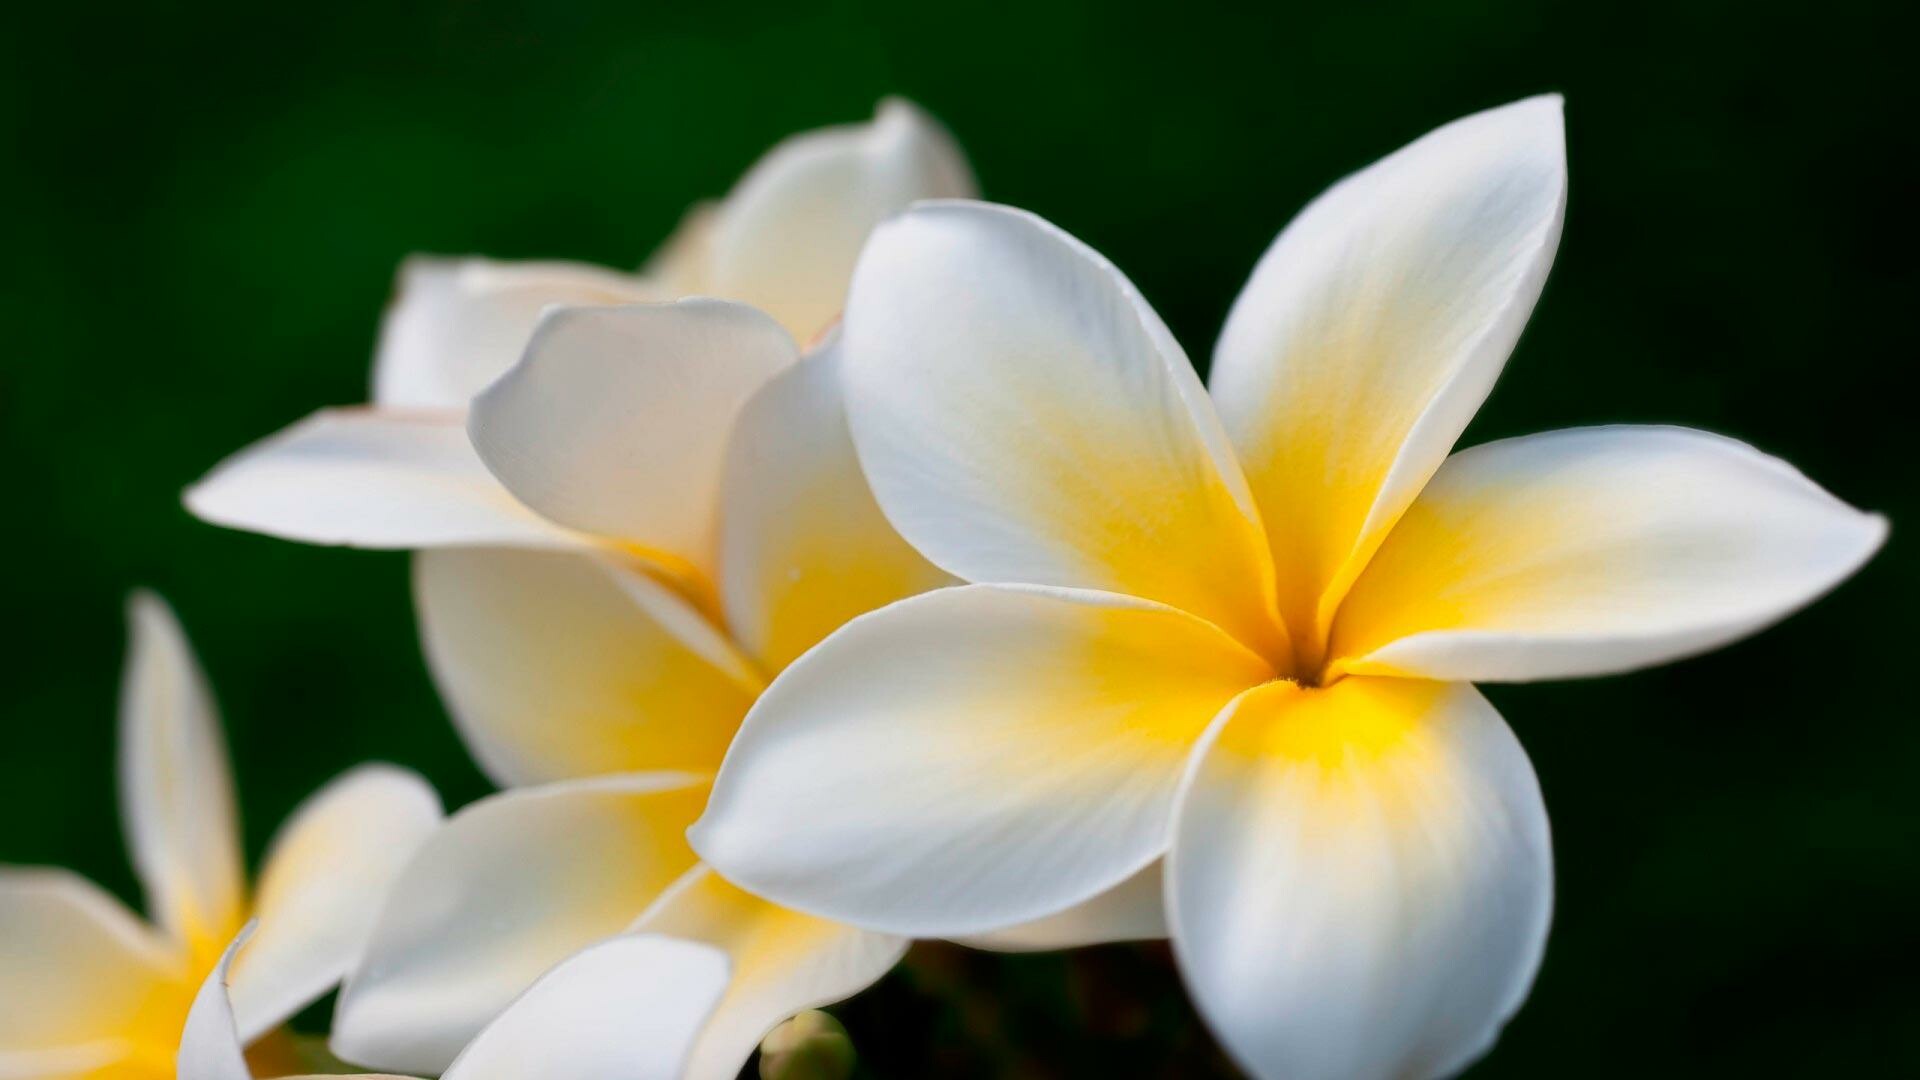 Frangipani Flower: Also known as a white plumeria, West Indian Jasmine, or nosegay, this tree has thick, gray-green, succulent branches and long, leathery green leaves. 1920x1080 Full HD Wallpaper.